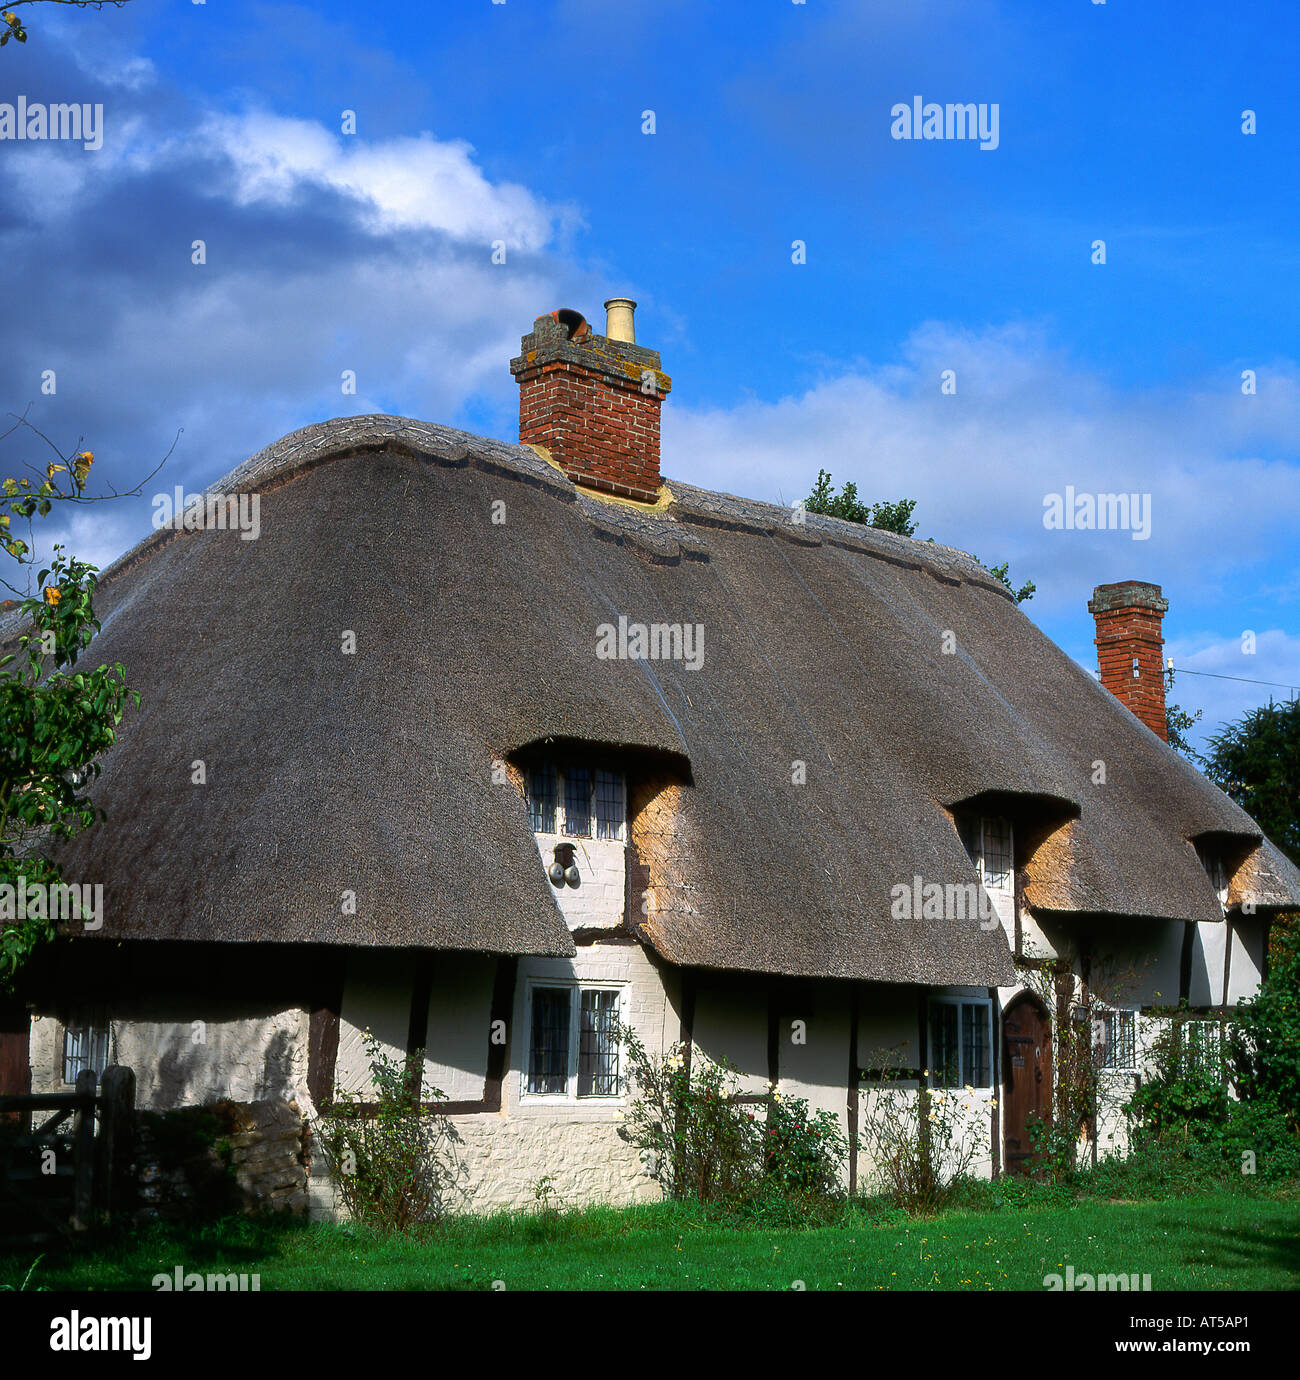 Thatched Cottage at Clifton Hampden in Oxfordshire. England Stock Photo